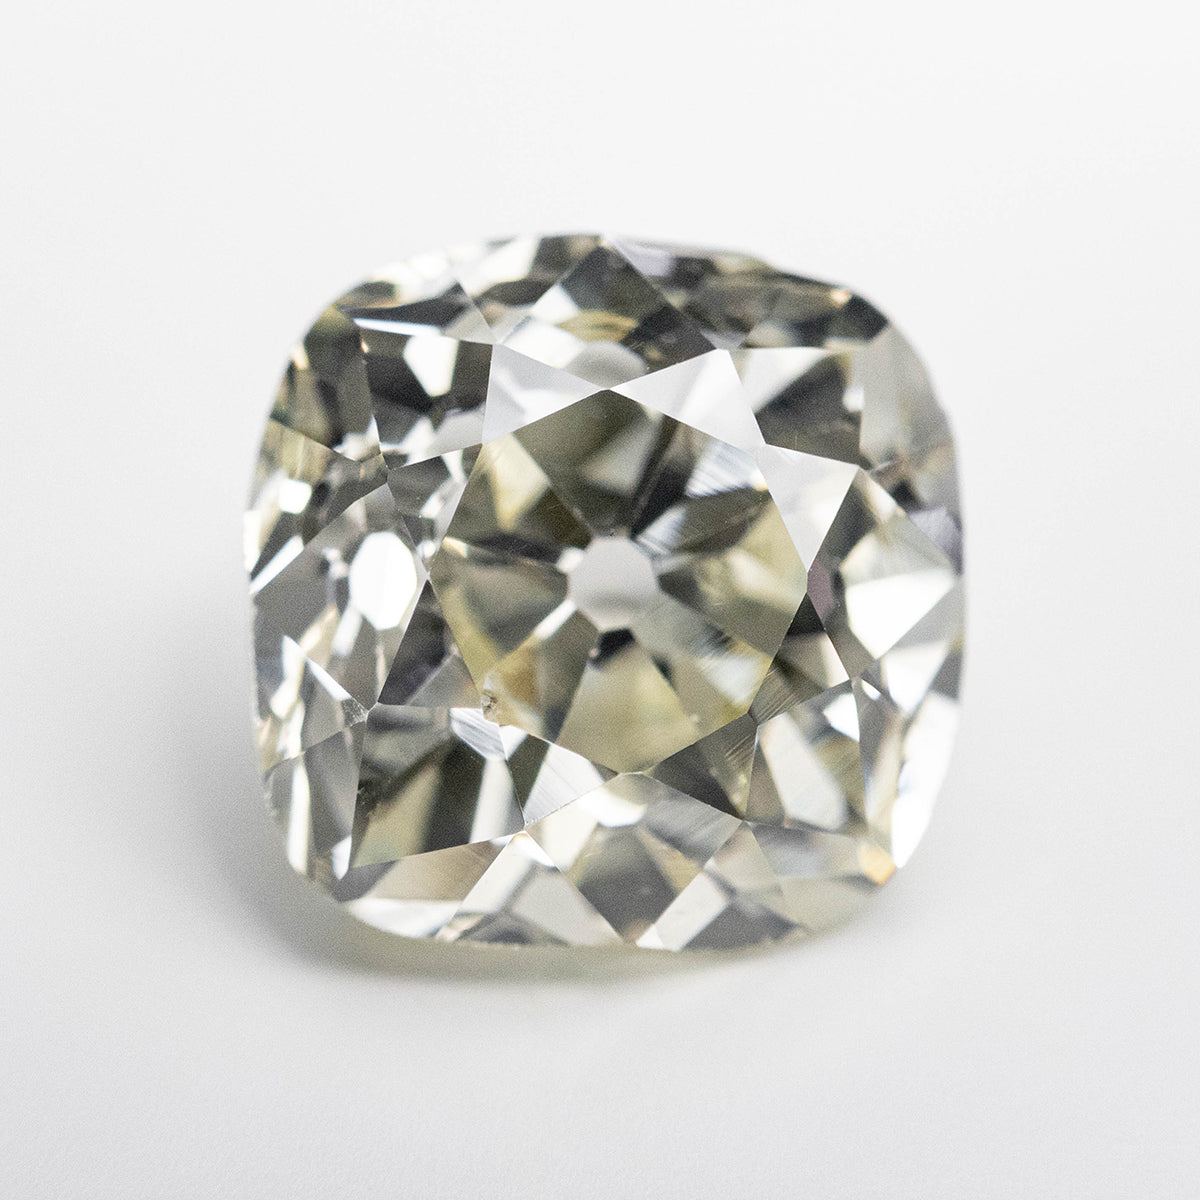 Everything you need to know about Antique Diamonds